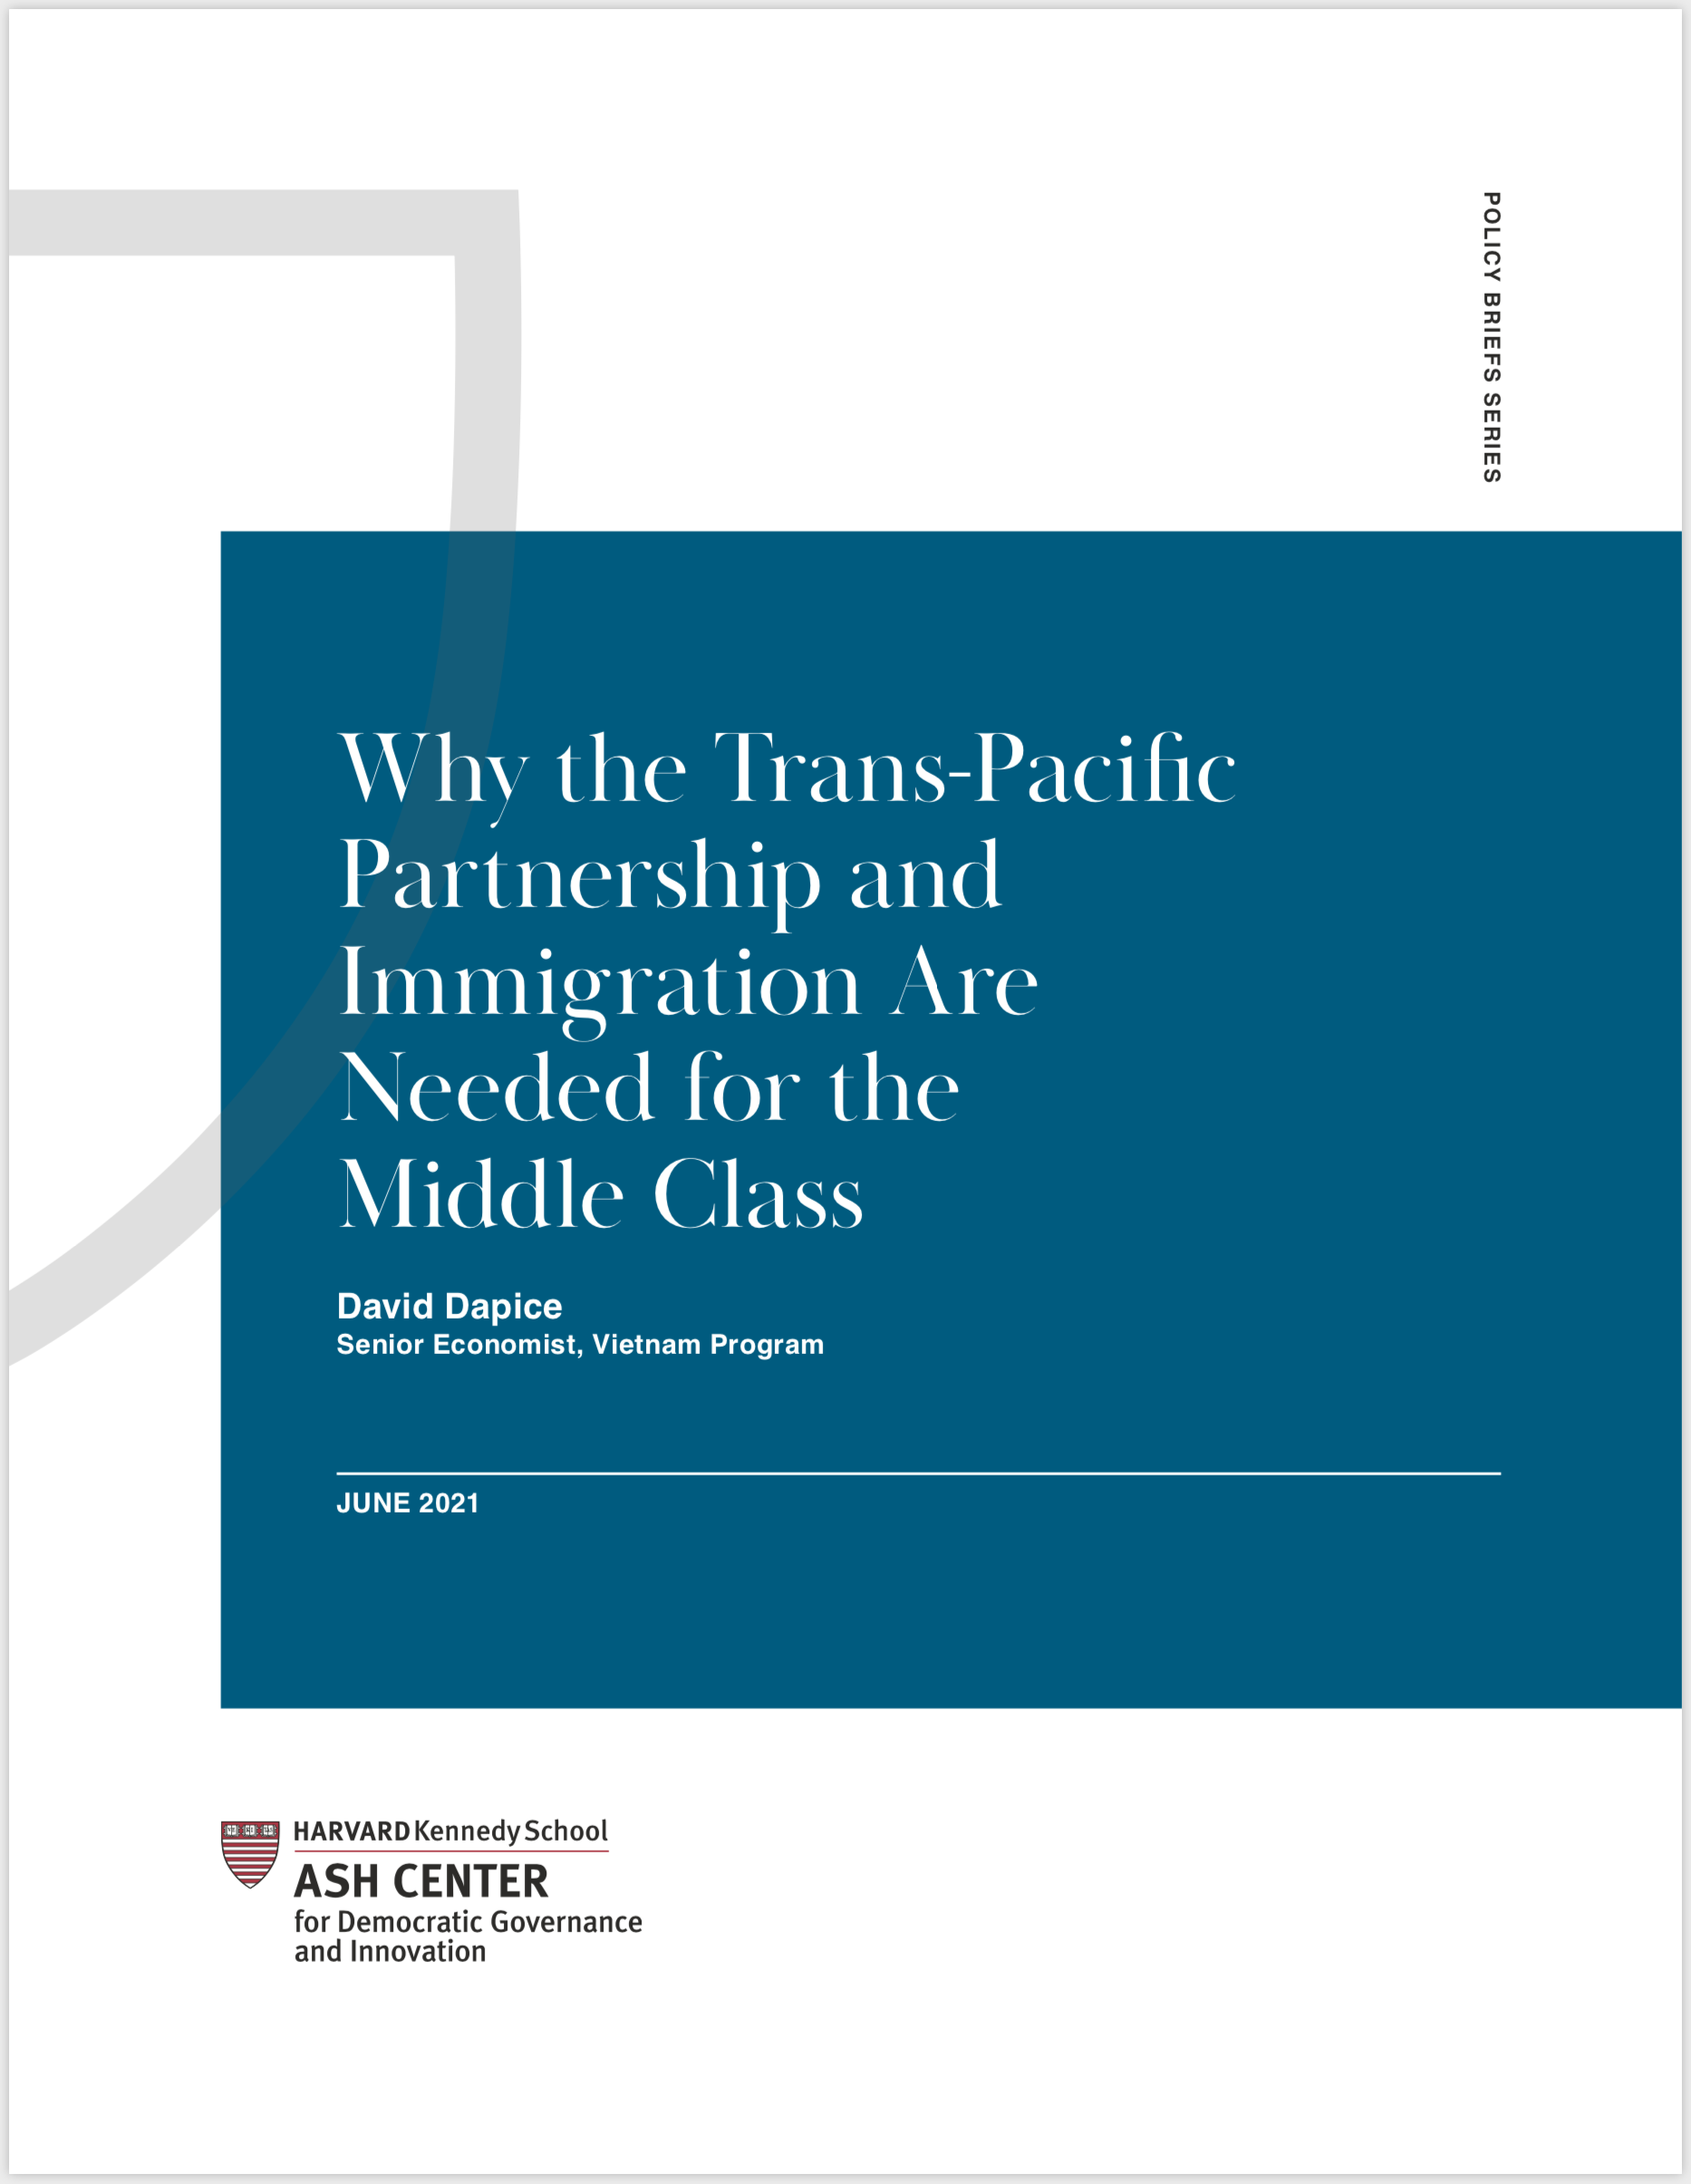 Why the Trans-Pacific Partnership and Immigration Are Needed for the Middle Class